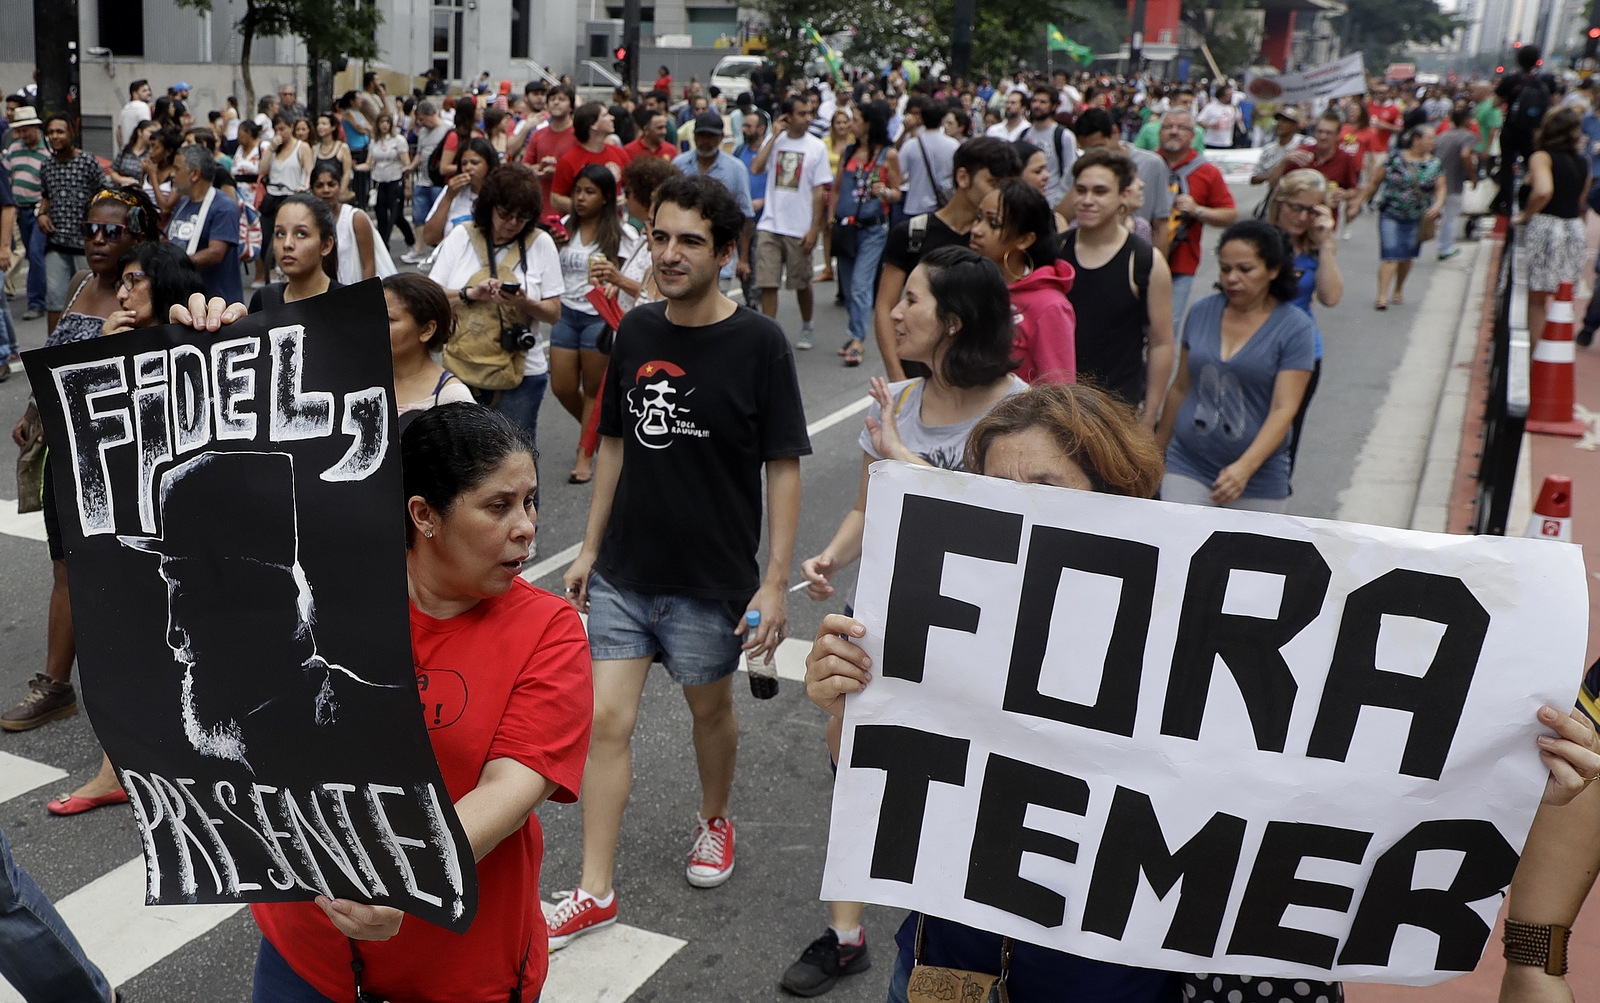 Demonstrators march with a sign that says in Portuguese "Get out Temer" and a drawing of Cuba's late President Fidel Castro, as they demand the impeachment of Brazil's President Michel Temer in Sao Paulo, Brazil, Nov. 27, 2016. (AP/Andre Penner)